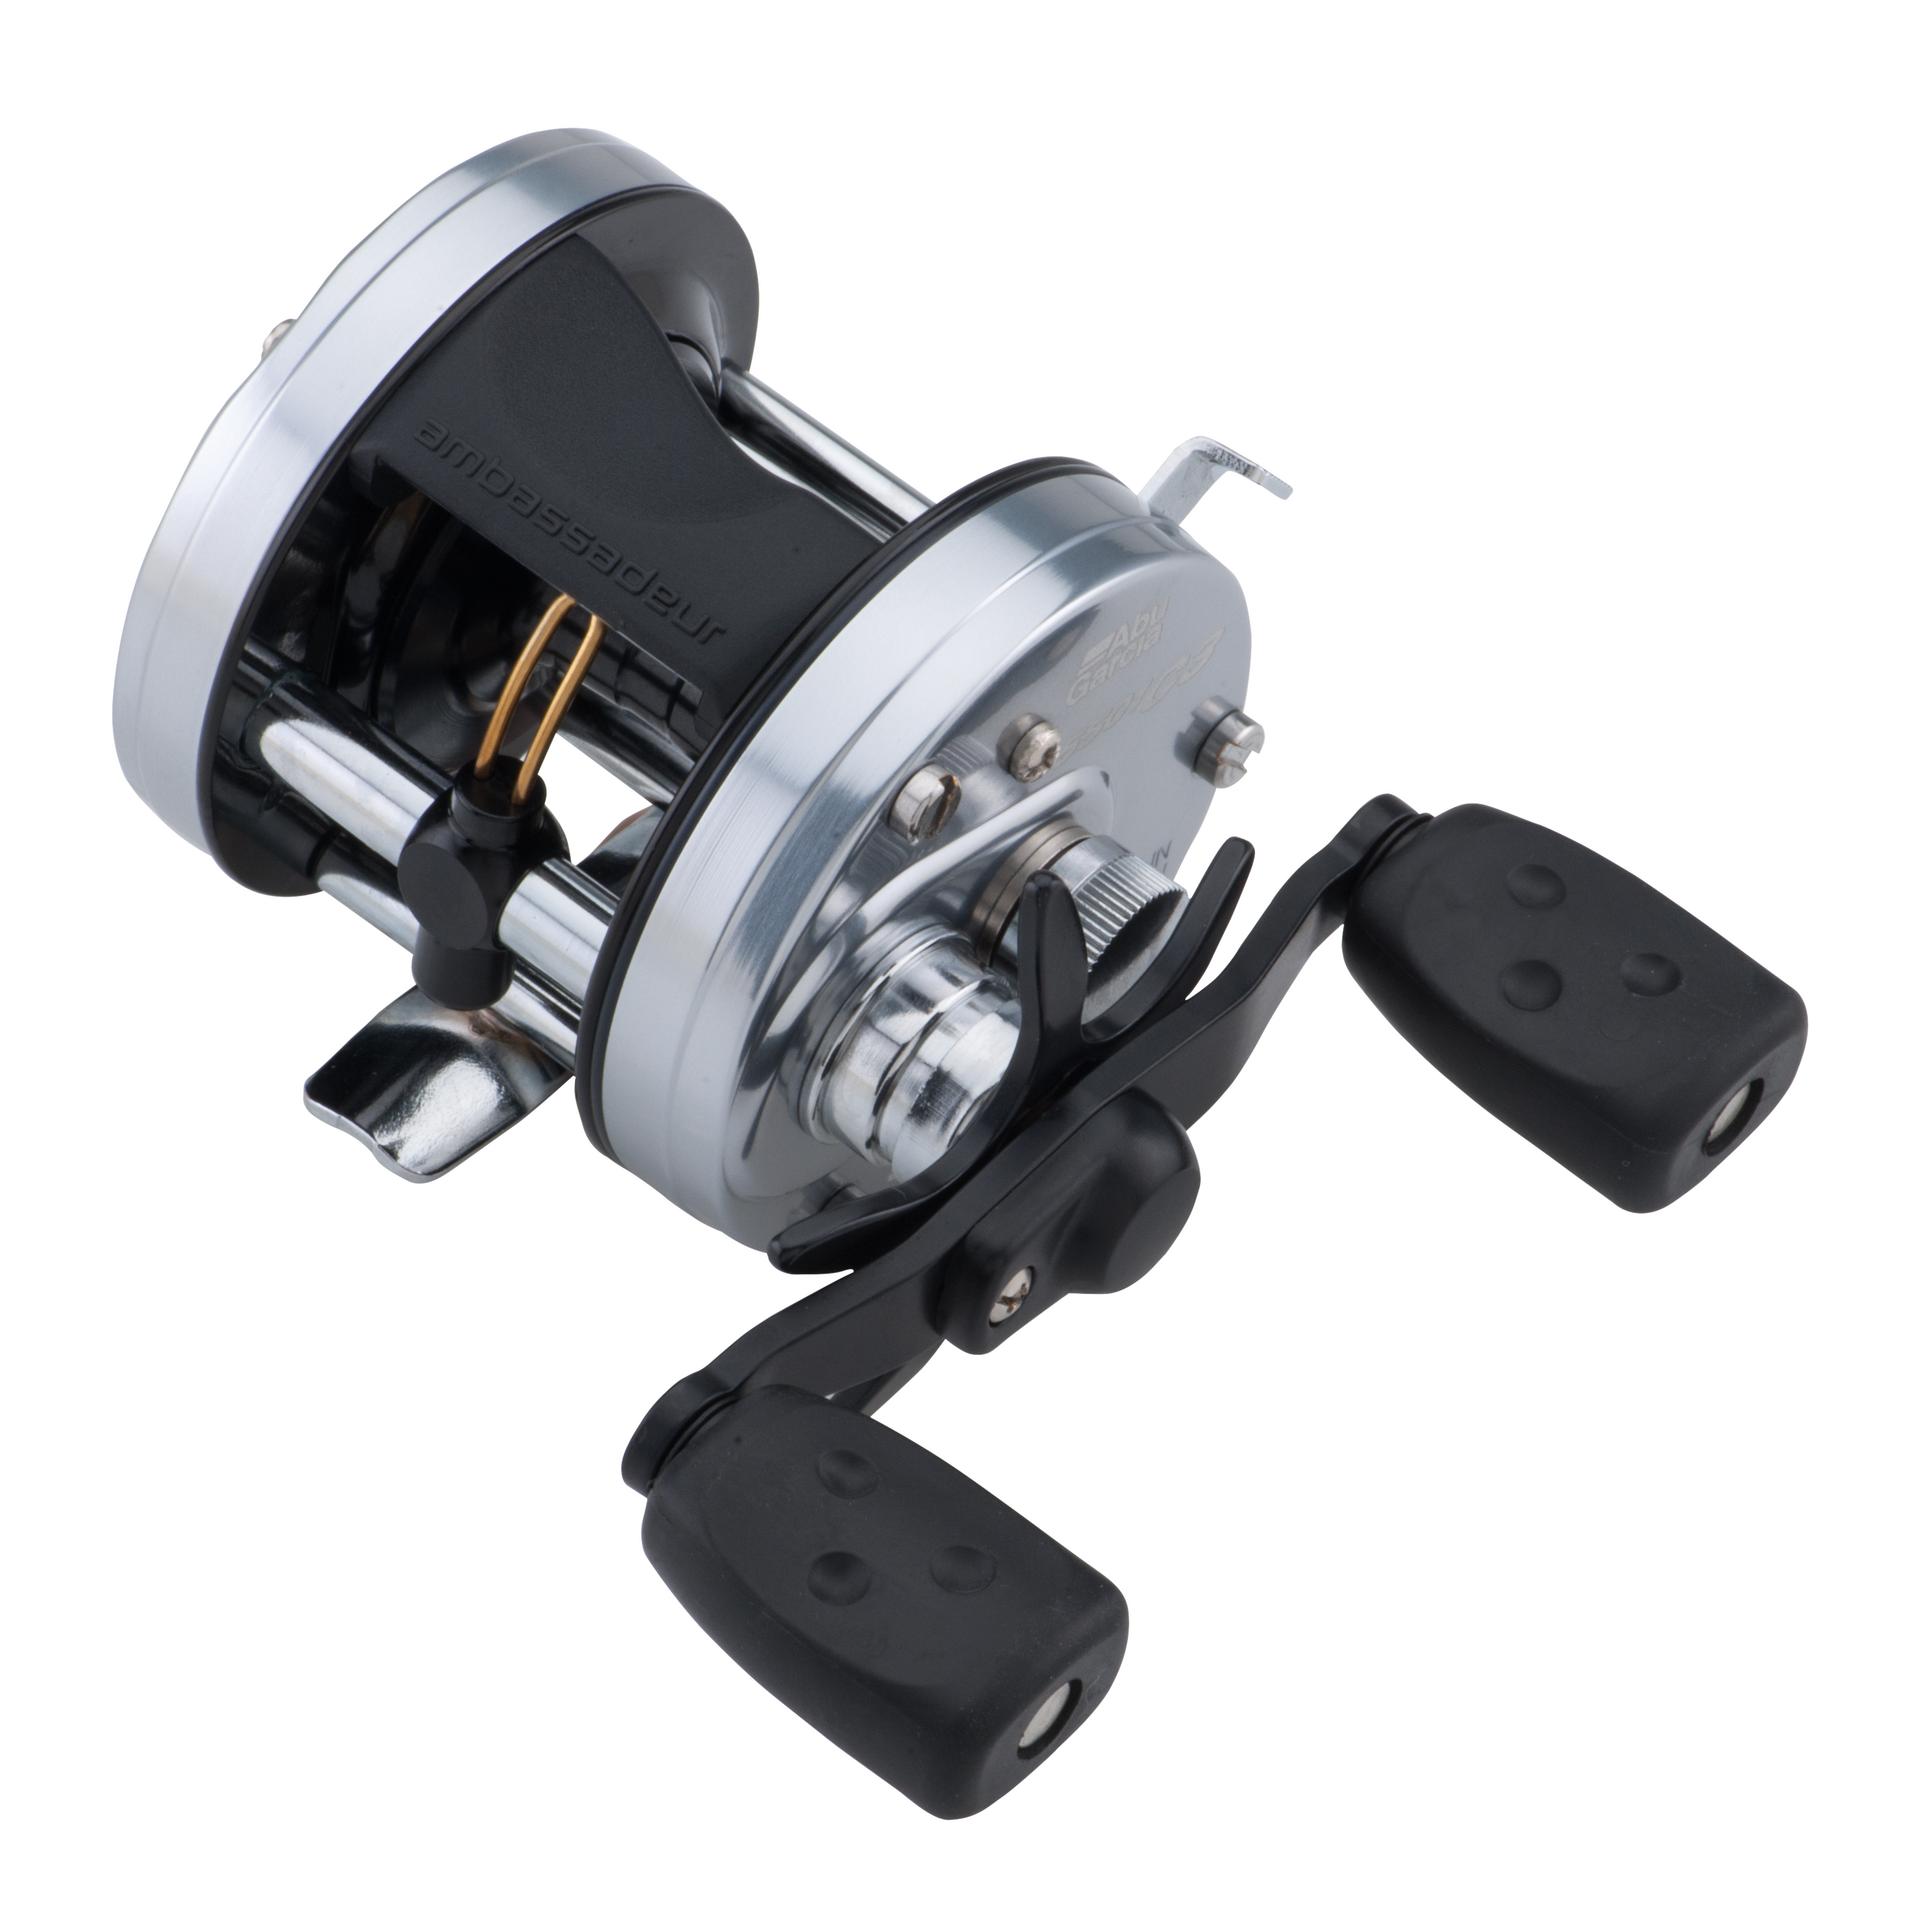 Abu Garcia - Made in Sweden, the Abu Garcia® Ambassadeur® C4 Round Reel  features our durable Carbon Matrix™ drag system which provides consistent  pressure across the entire drag range. Available in three